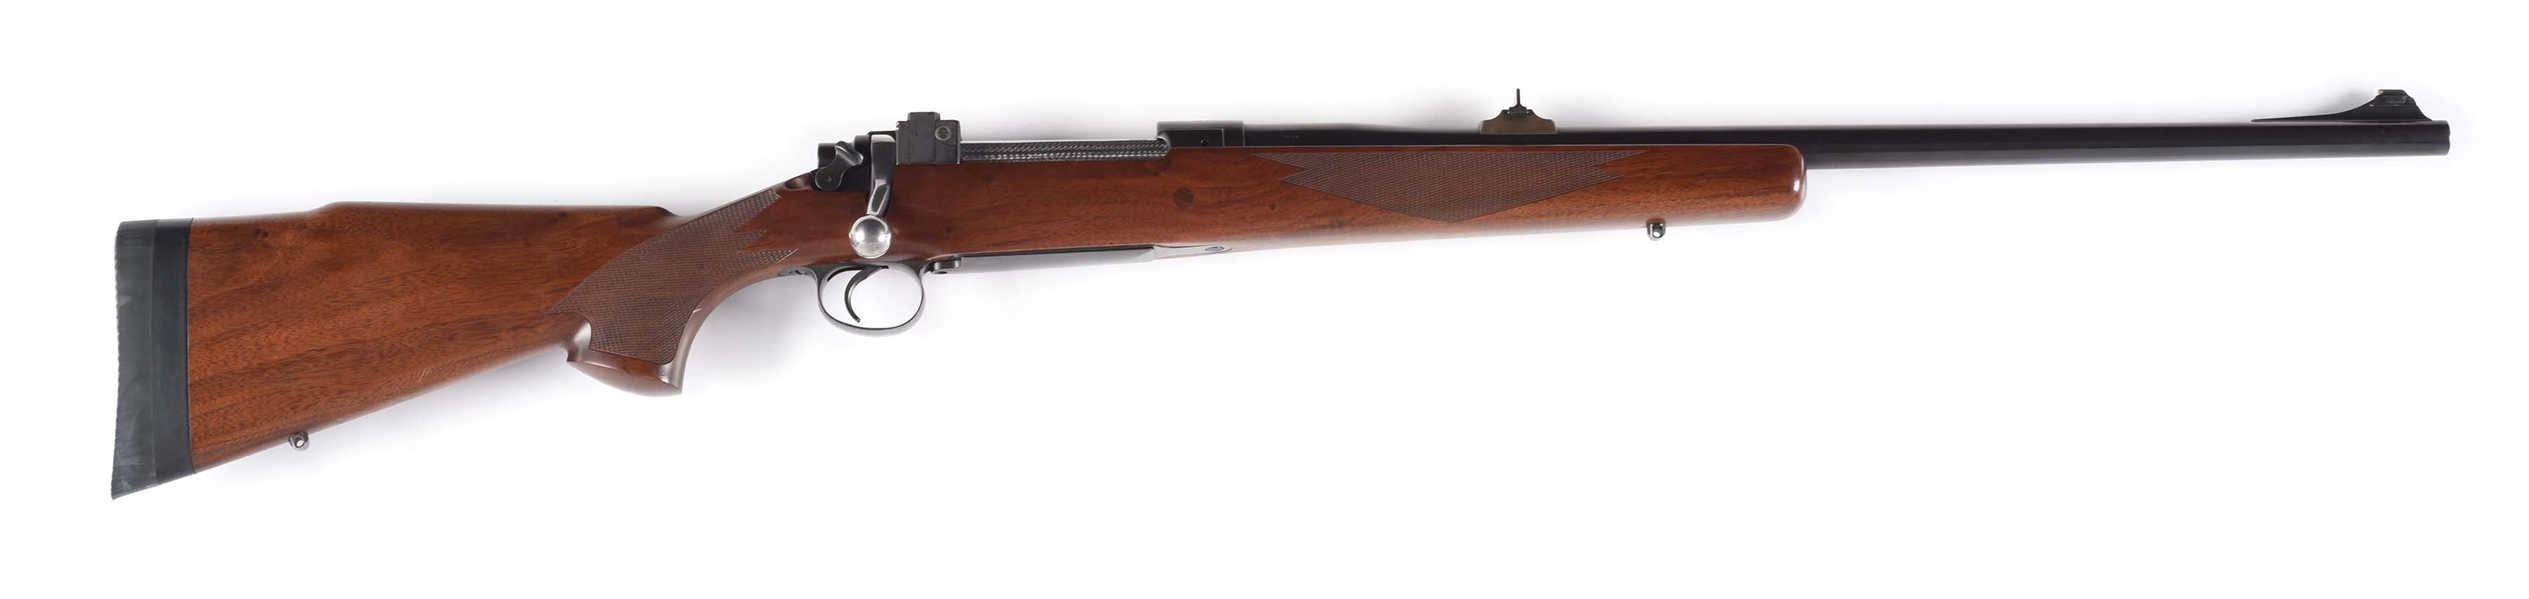 (C) CUSTOM BOLT ACTION RIFLE ON AN ENFIELD 1917 ACTION AND CHAMBERED IN .416 RIGBY.